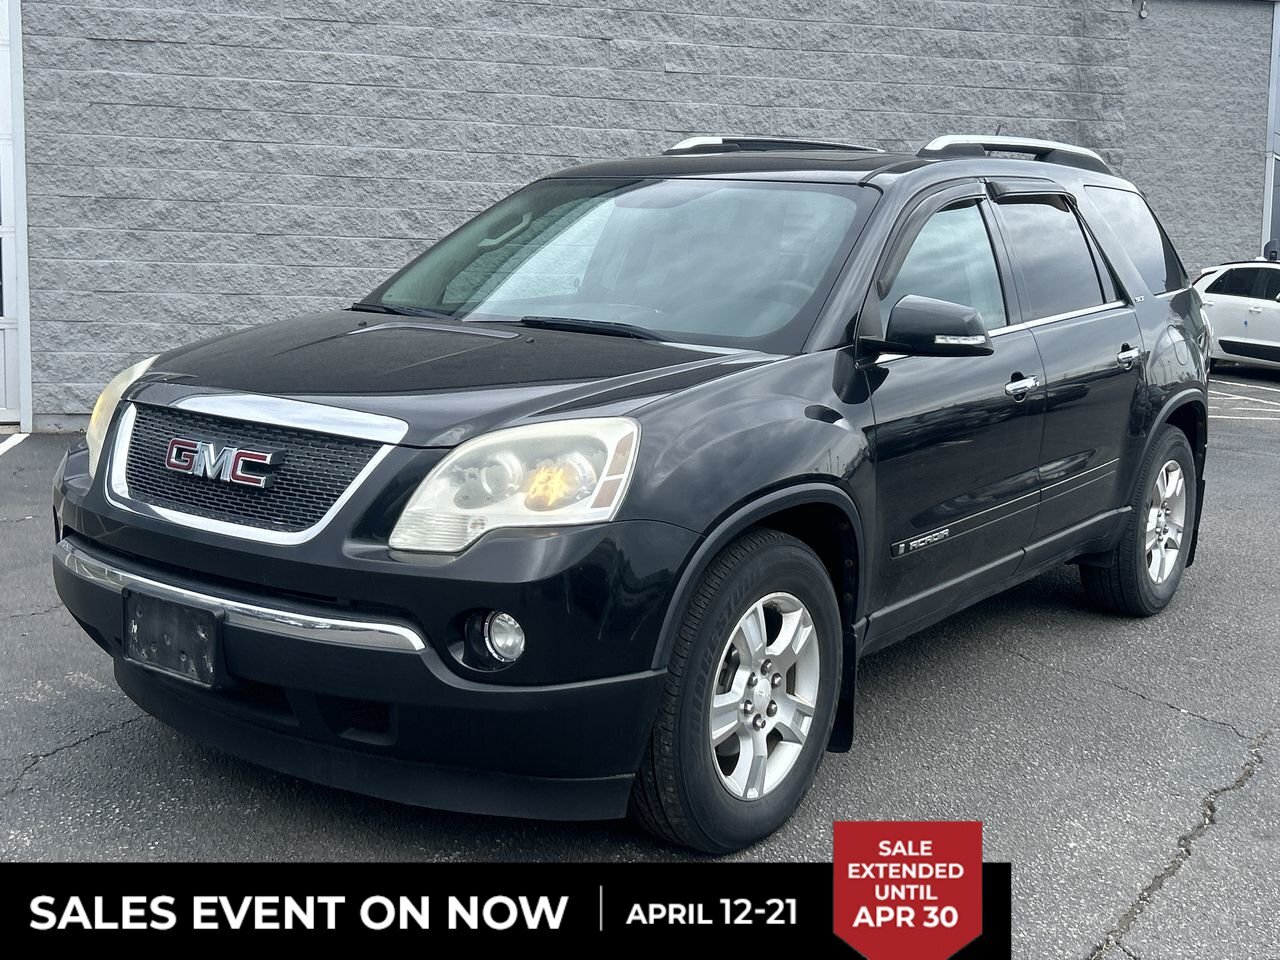 2008 GMC Acadia SLT FWD AS-IS SPECIAL | WELL KEPT | ONE OWNER | AW